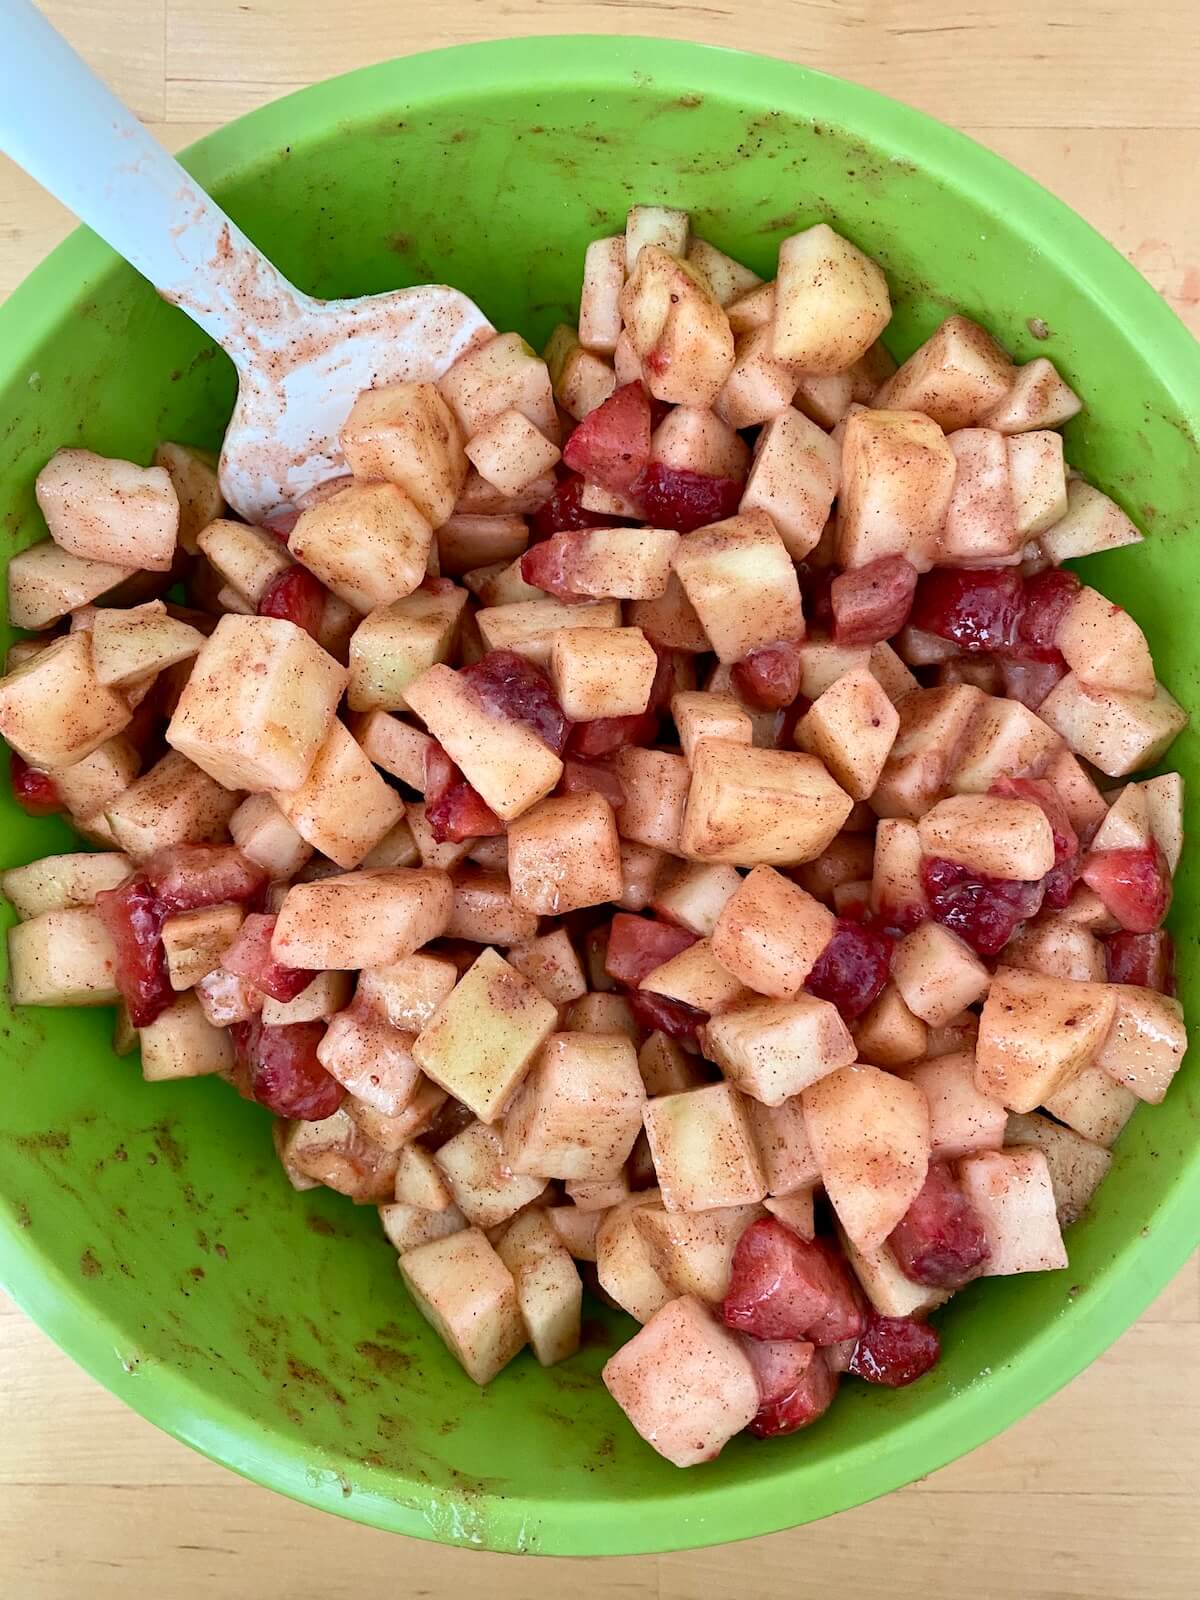 The diced fruit mixed with flour, cinnamon, and brown sugar.